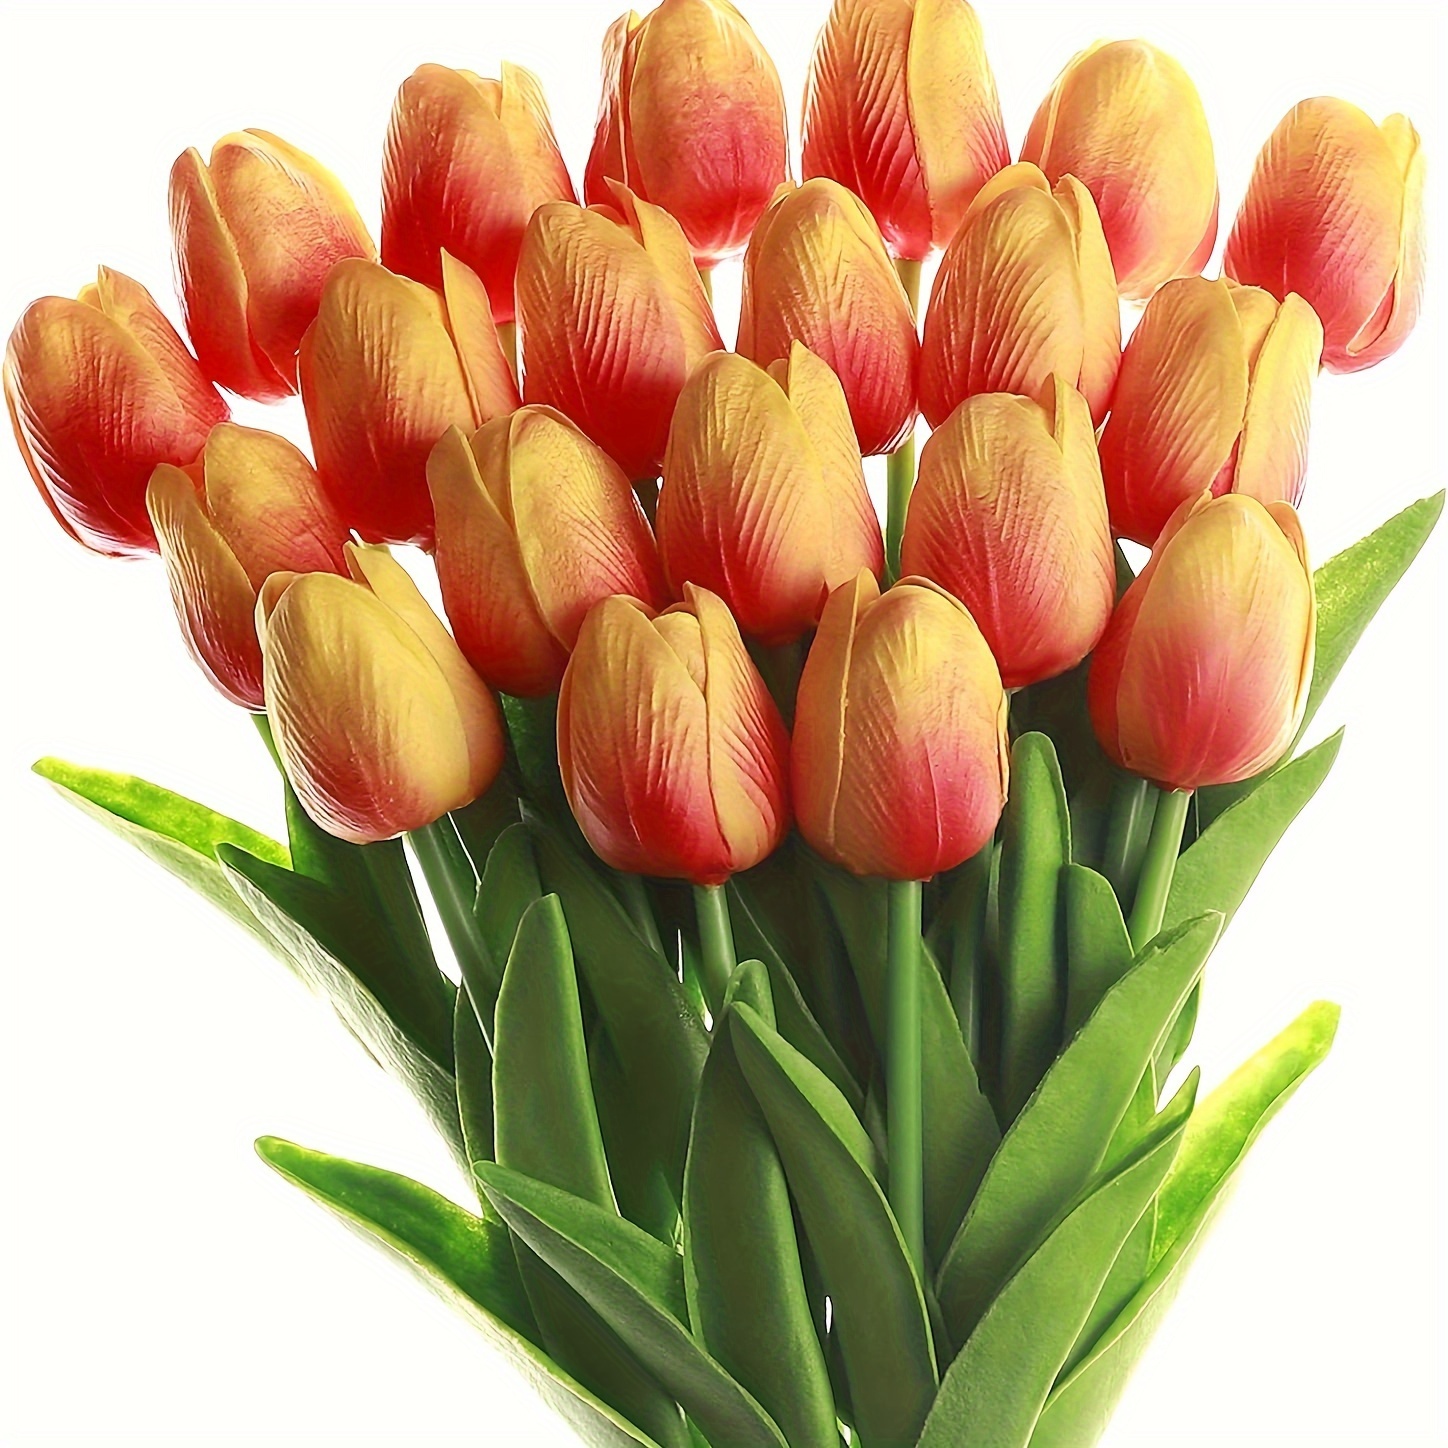 

10pcs Real Touch Tulips Flower Bouquet - Perfect For Home Decor, Weddings, And Parties - Latex Flowers With Pu Coating - Home Tabletop Decoration Supplies